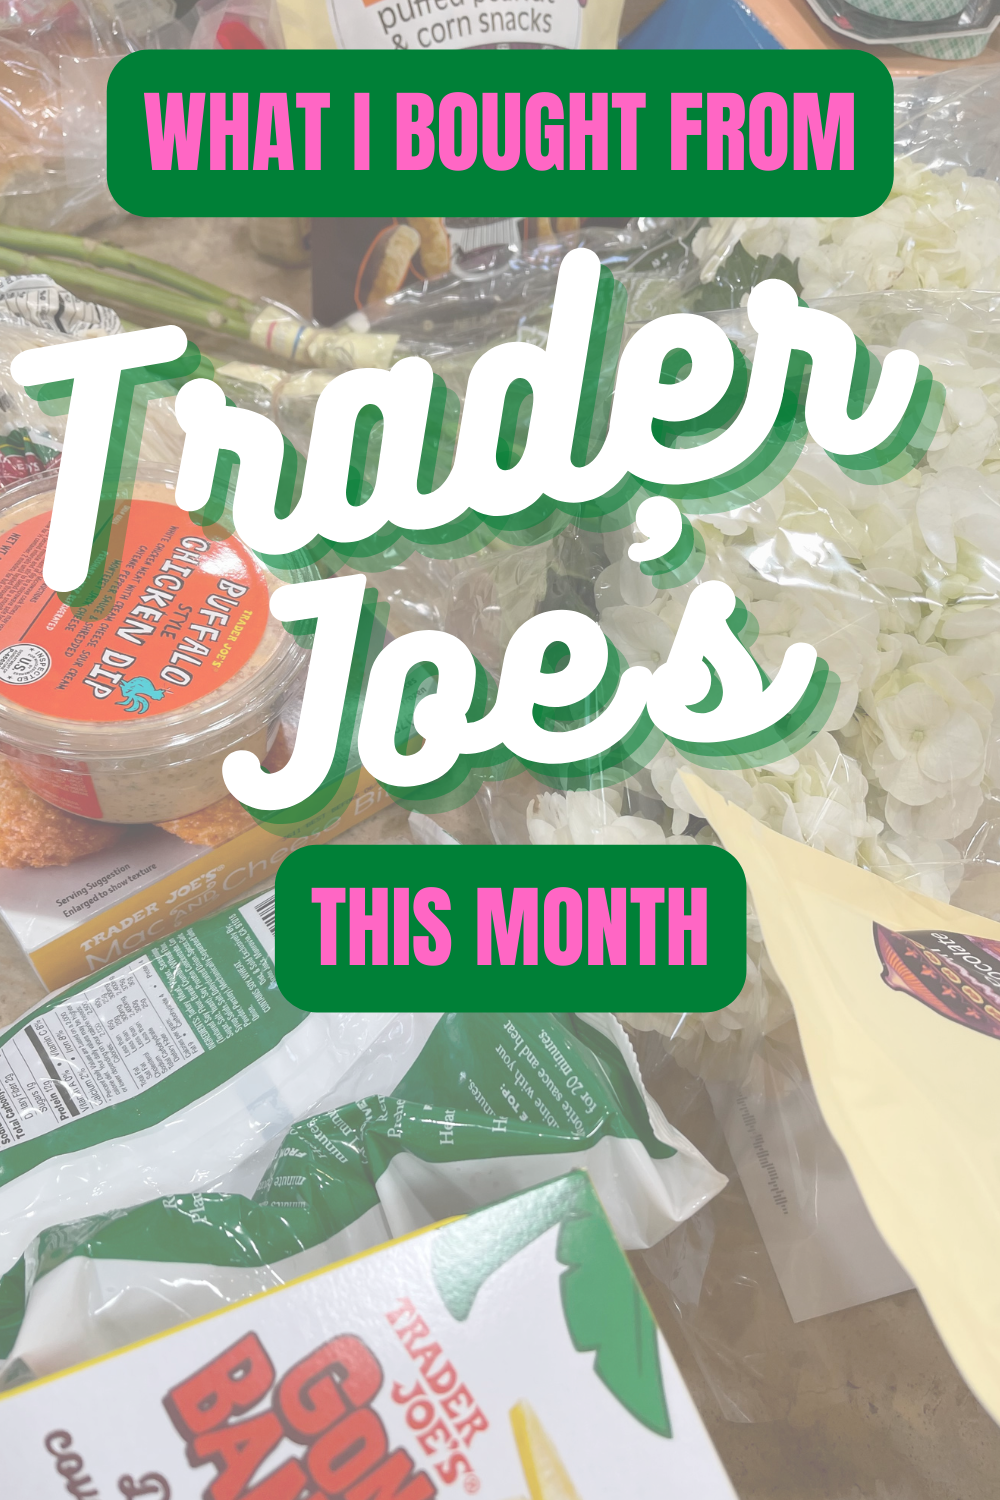 Looking for the best Trader Joe's products? Today I'm sharing all the items I bought and loved this month from Trader Joe's!